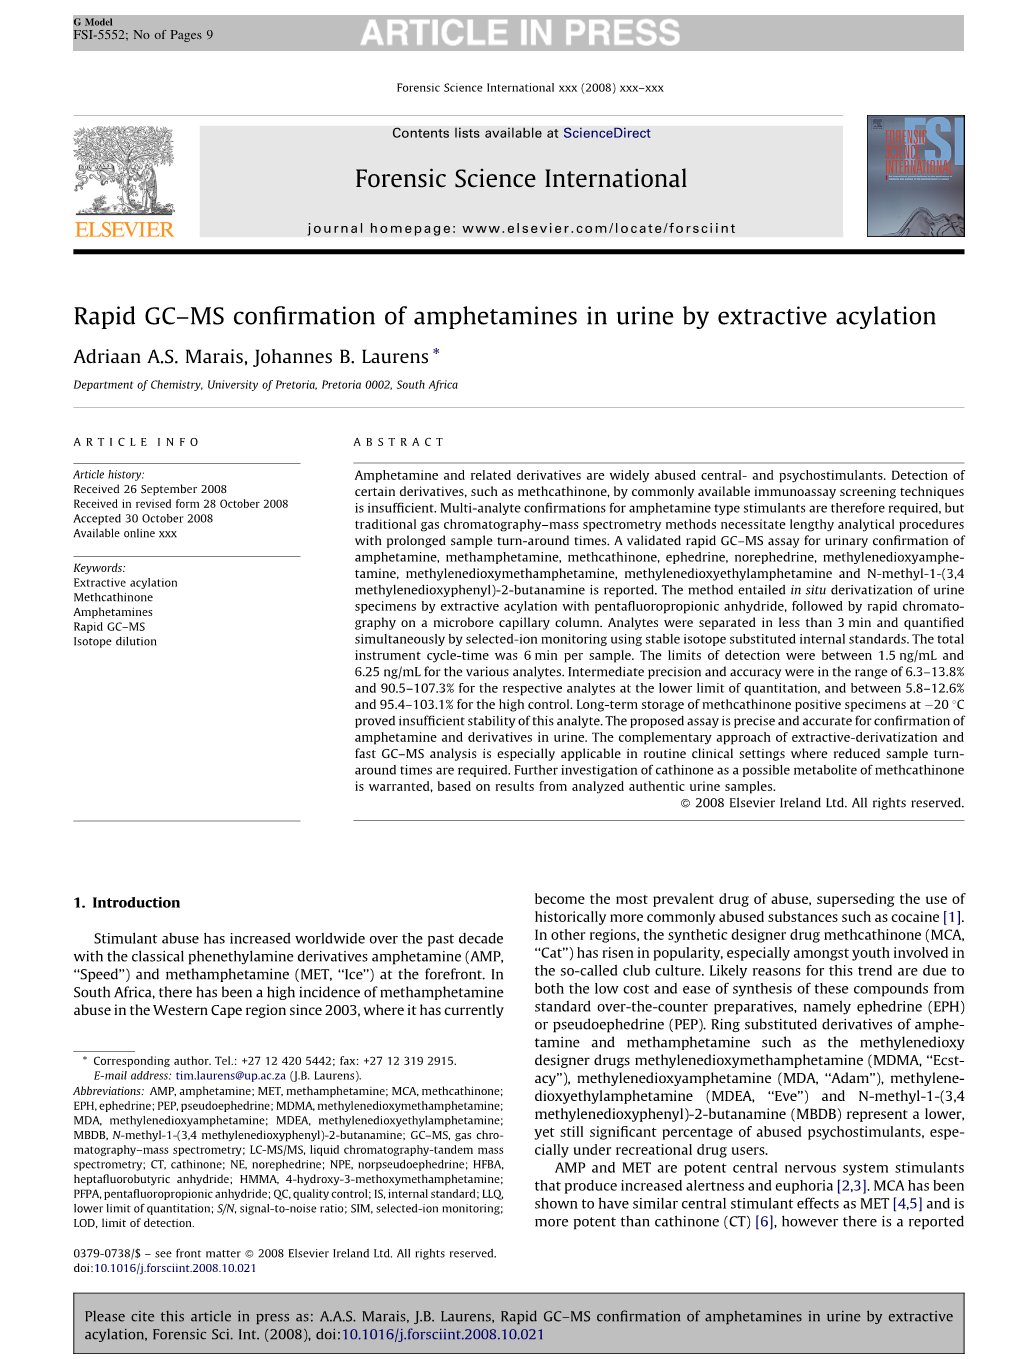 Rapid GC–MS Conﬁrmation of Amphetamines in Urine by Extractive Acylation